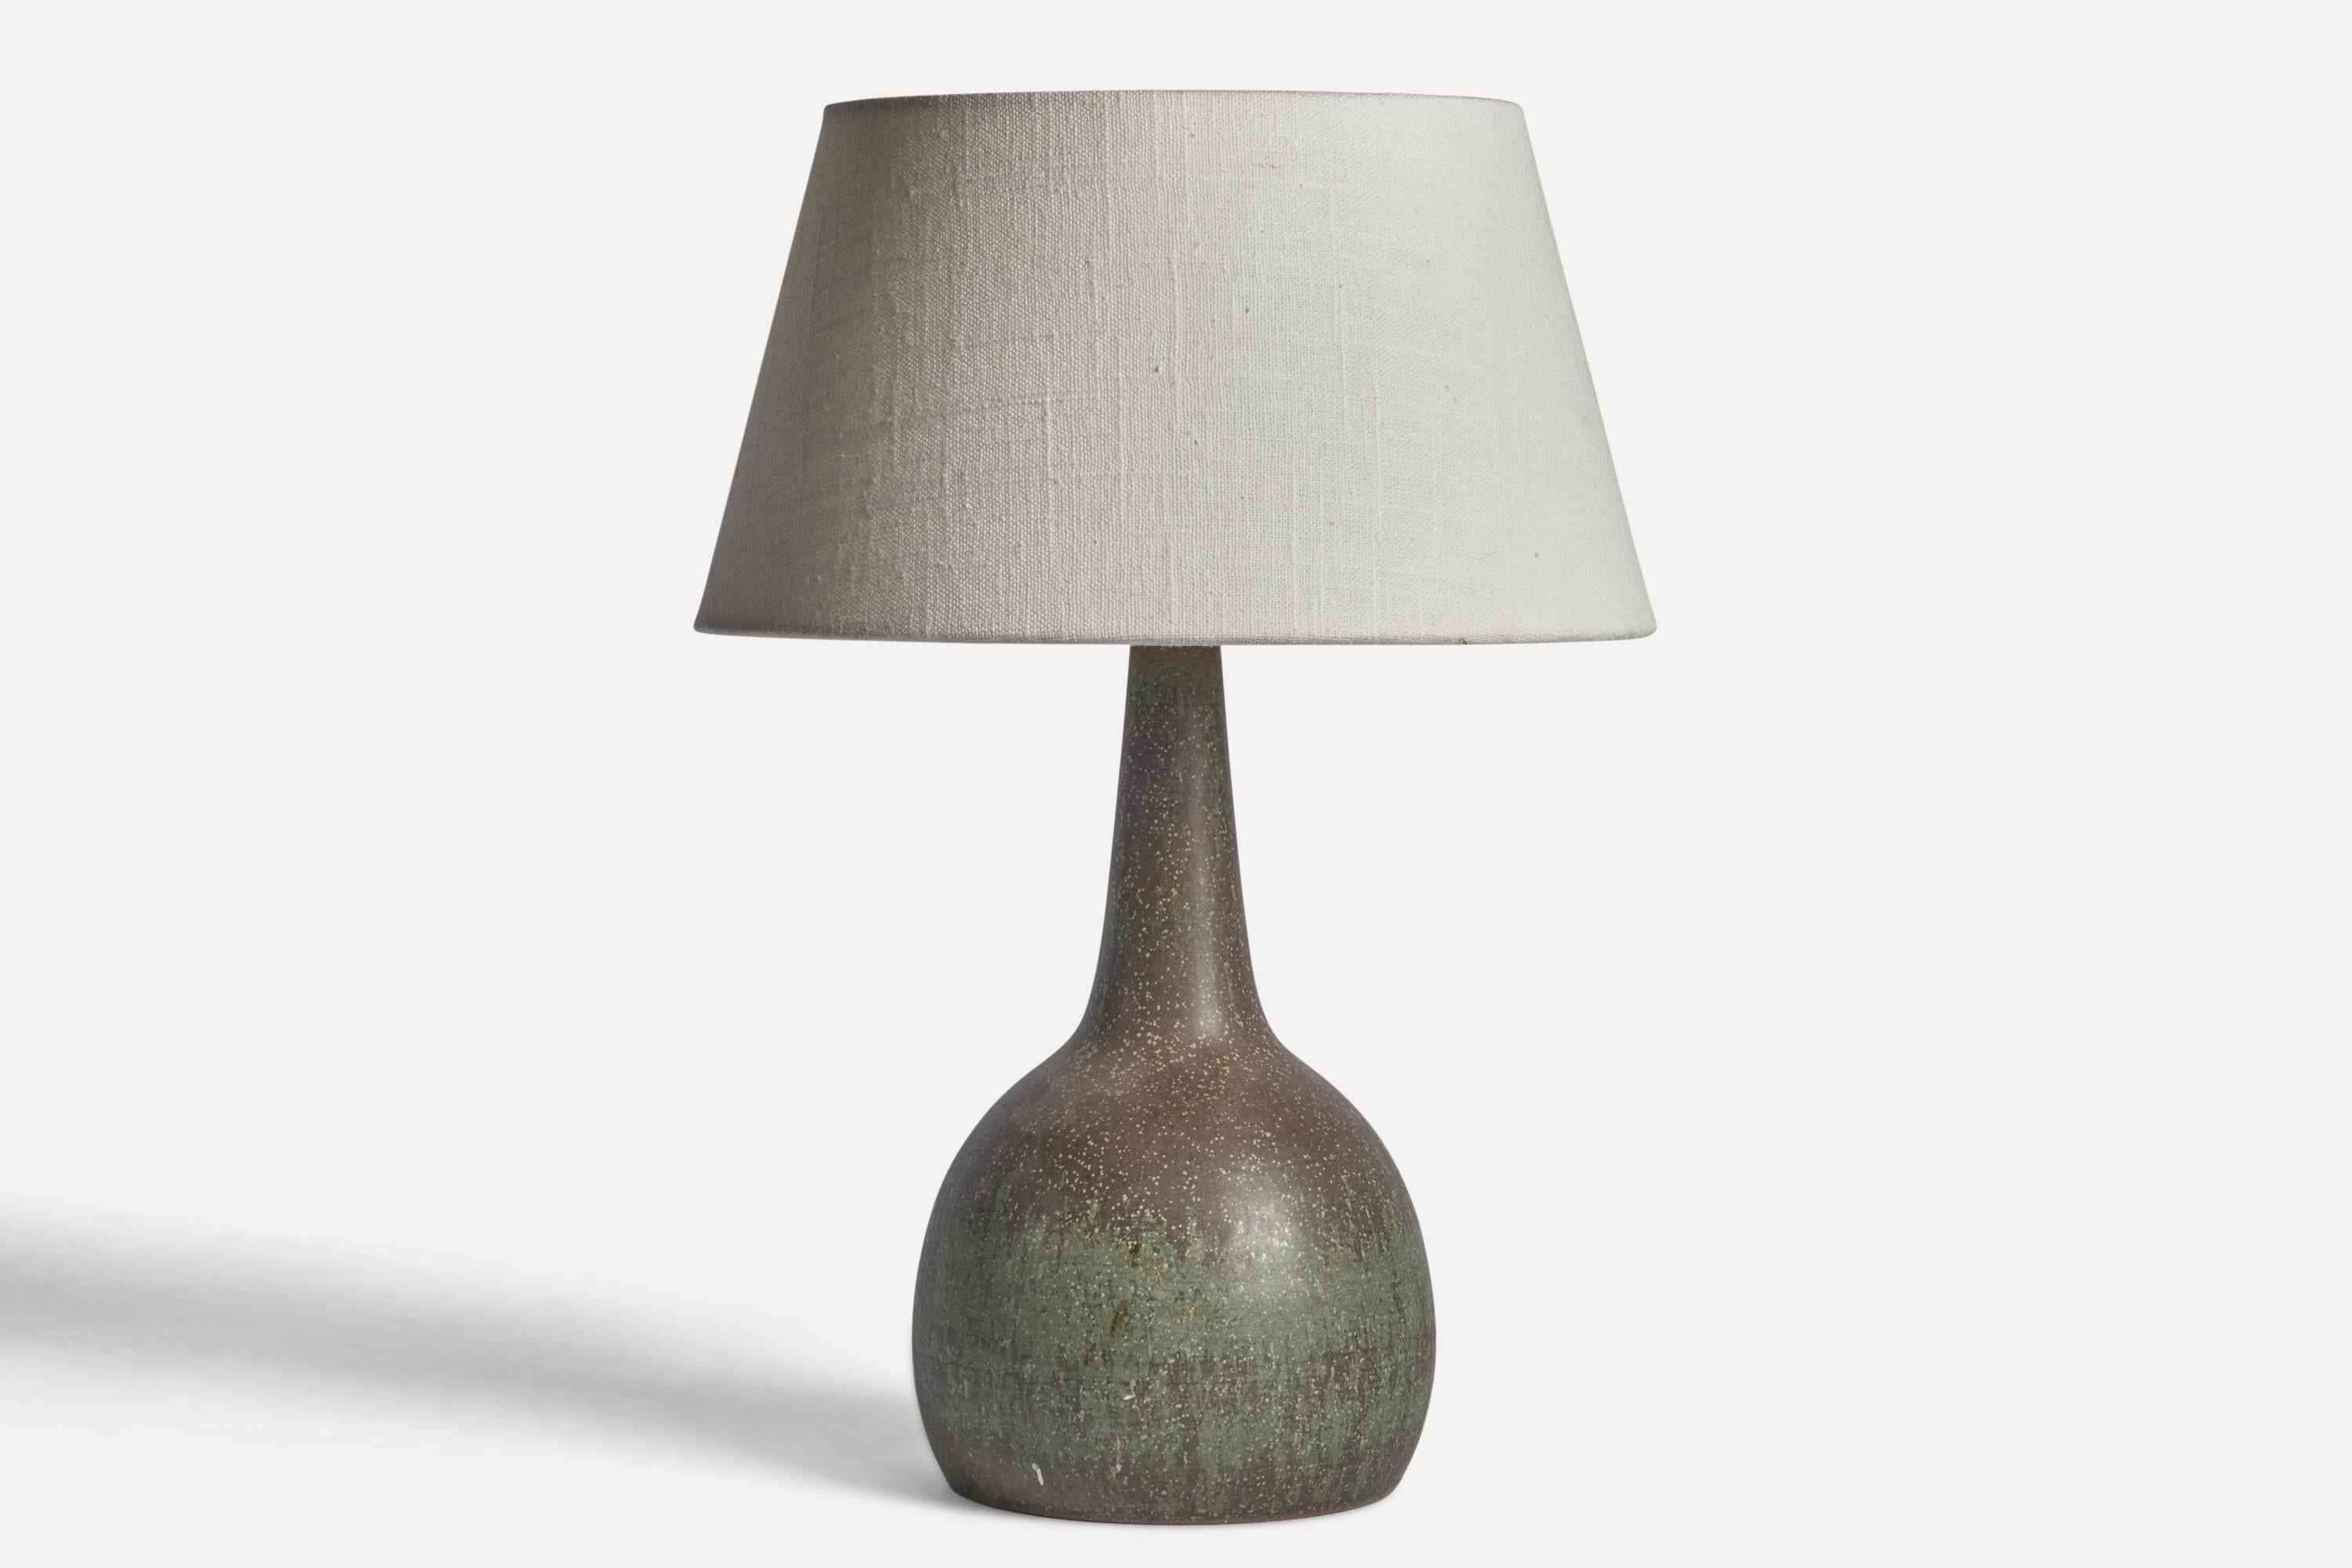 A green-glazed stoneware table lamp designed by Per & Annelise Linneman-Schmidt and produced by Palshus, Denmark, 1960s.

Dimensions of Lamp (inches): 11.5